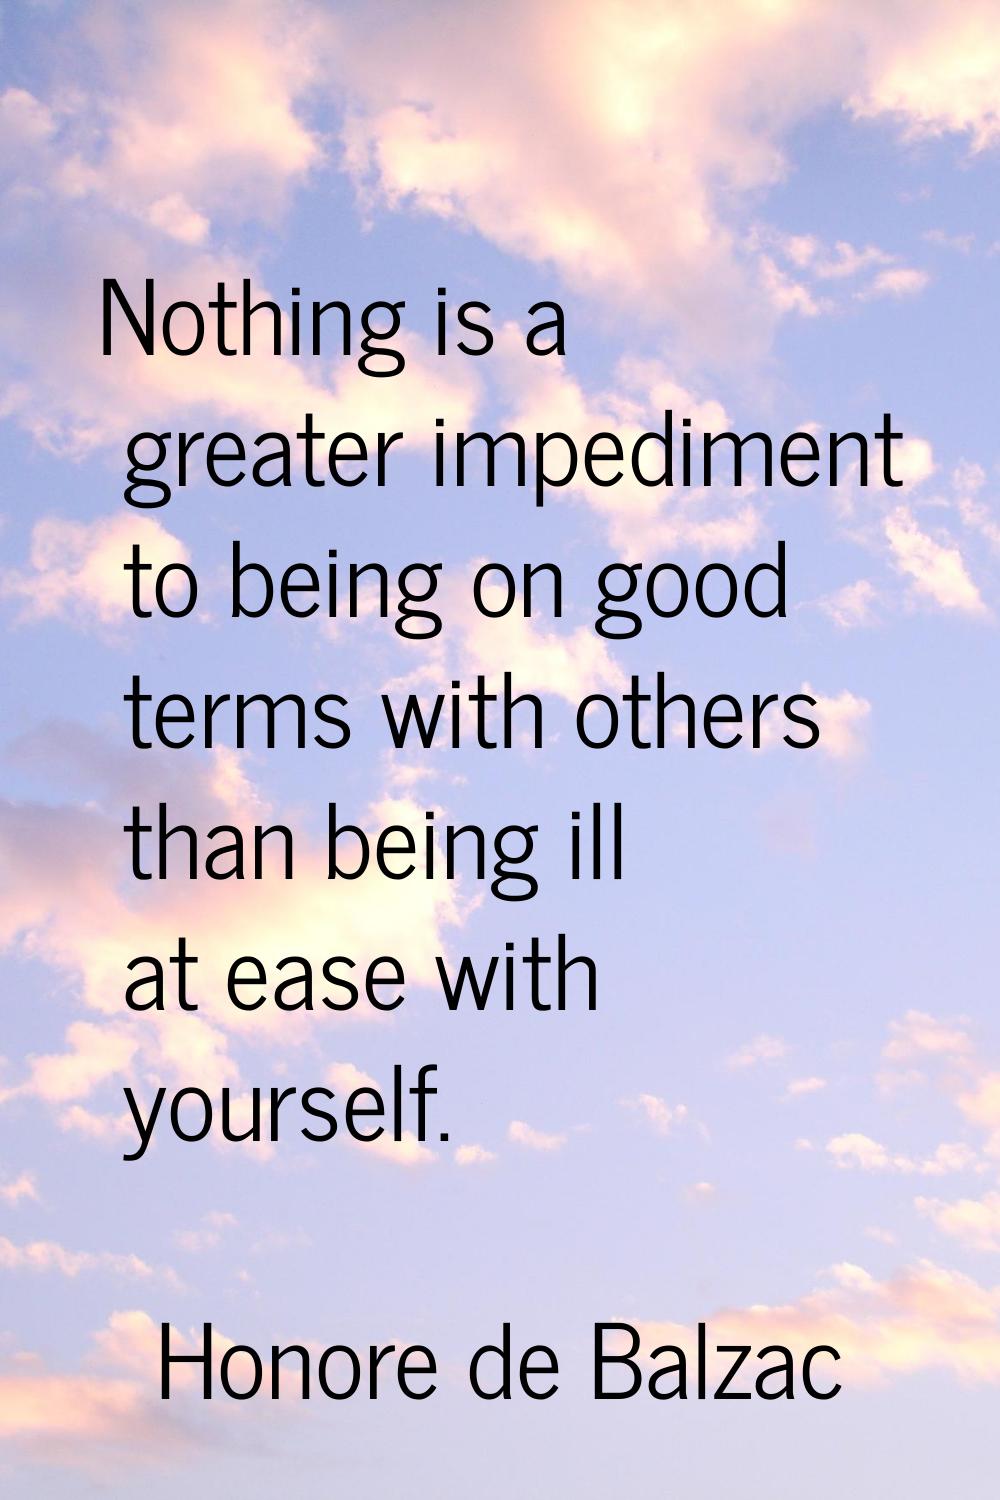 Nothing is a greater impediment to being on good terms with others than being ill at ease with your